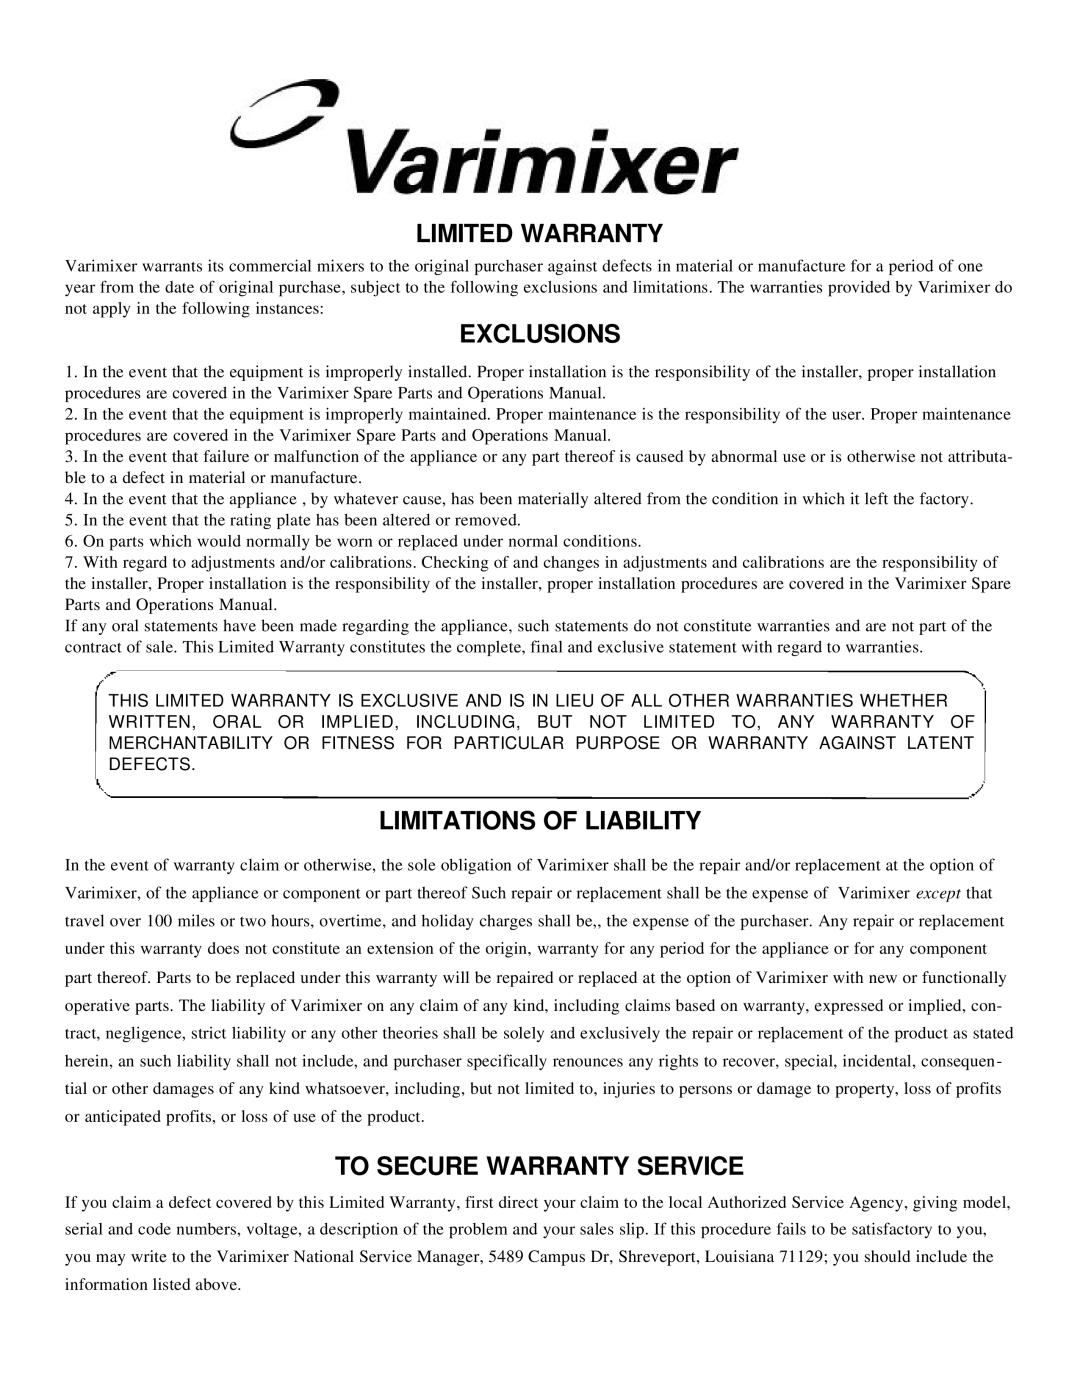 Varimixer W20D operation manual Limited Warranty, Exclusions, Limitations Of Liability, To Secure Warranty Service 